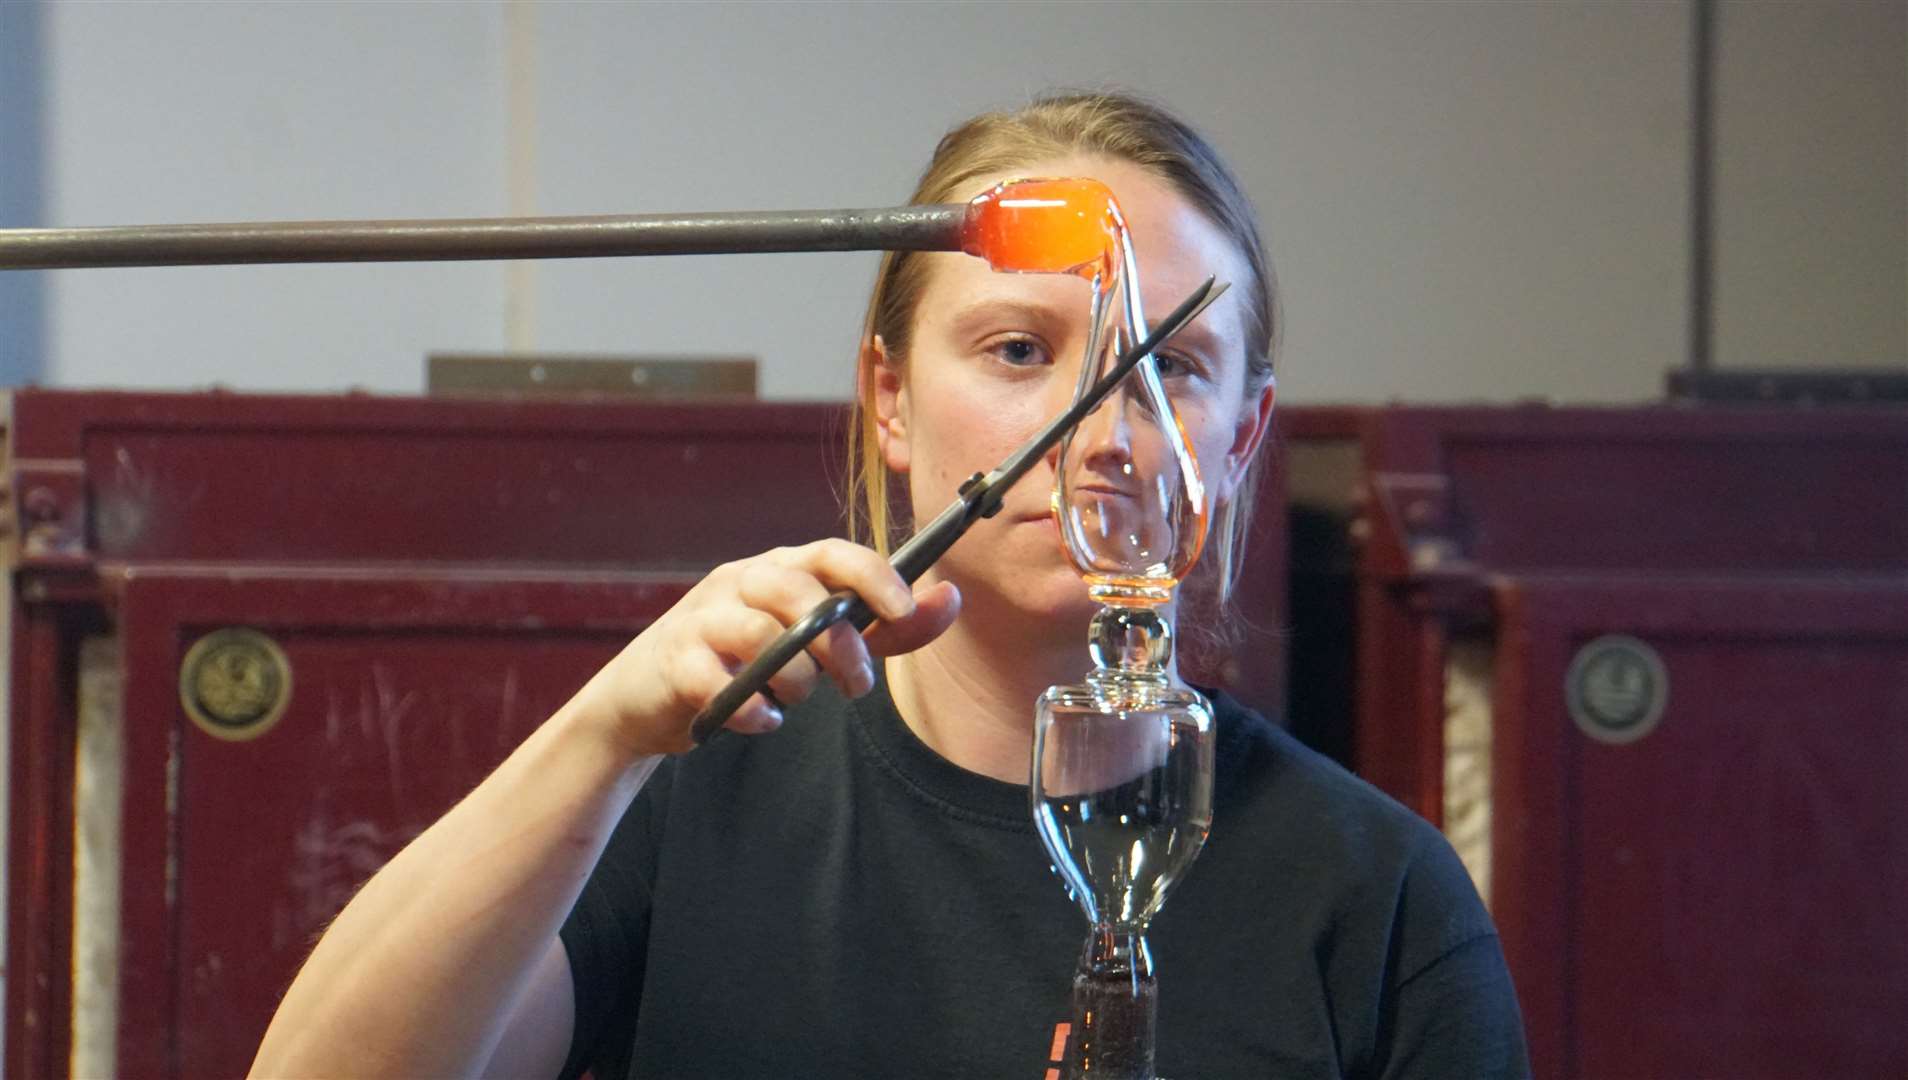 North Lands Creative in better days when the public was invited to watch glass making at its Lybster studio. Picture: DGS